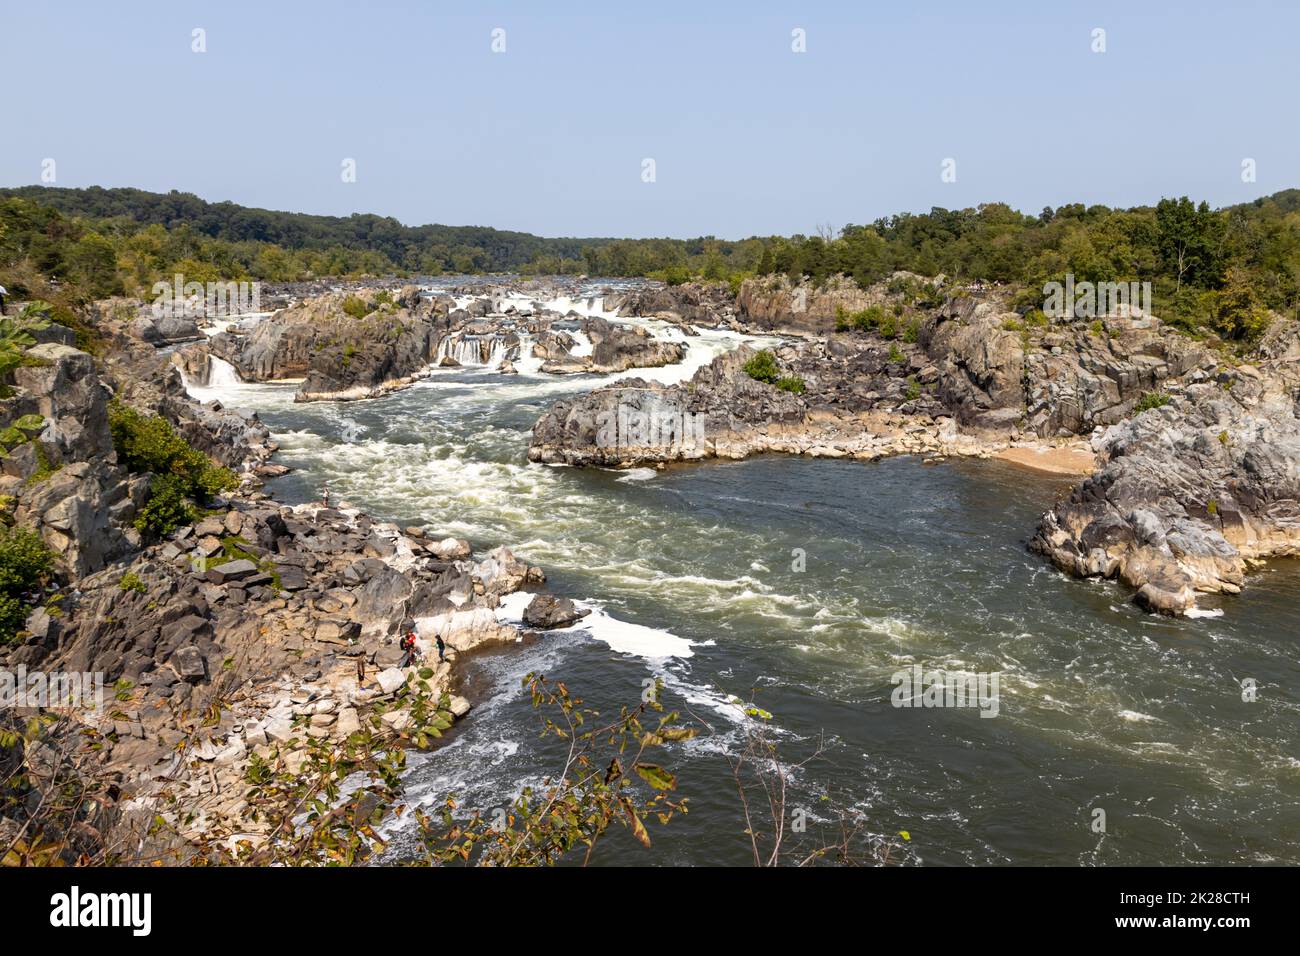 Spectacular view of the Great Falls of the Potomac - Great Falls Park, Mclean, VA Stock Photo